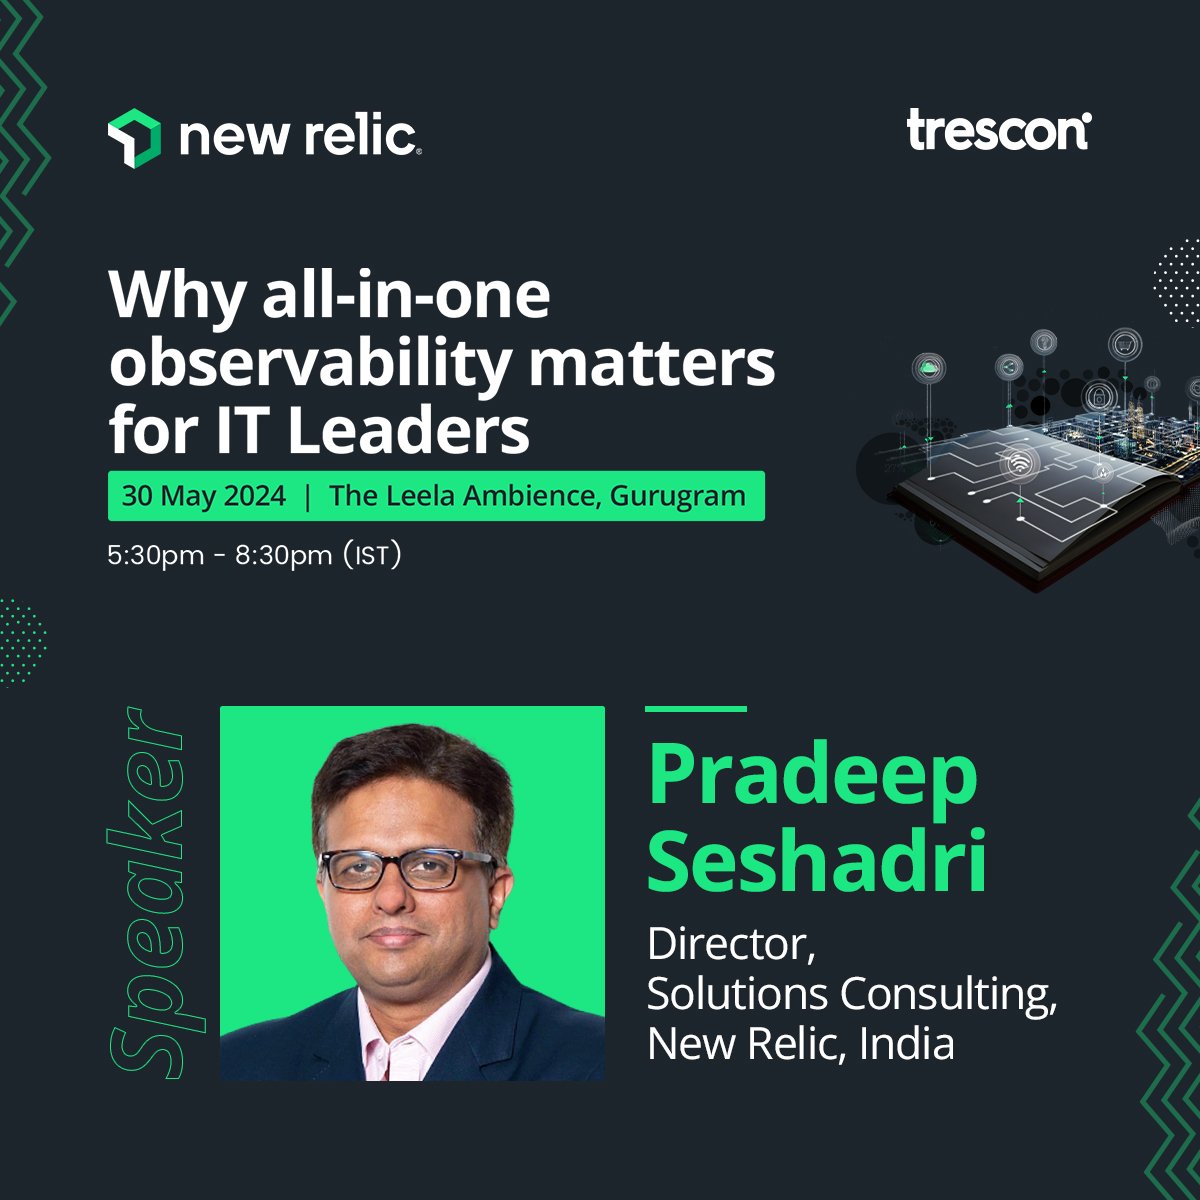 Meet Pradeep Seshadri as Moderator in @newrelic’s session, where he'll explore the role of observability in achieving cost efficiency and operational excellence.

Reserve your spot today: hubs.li/Q02wjFt-0

#newrelic #trescon